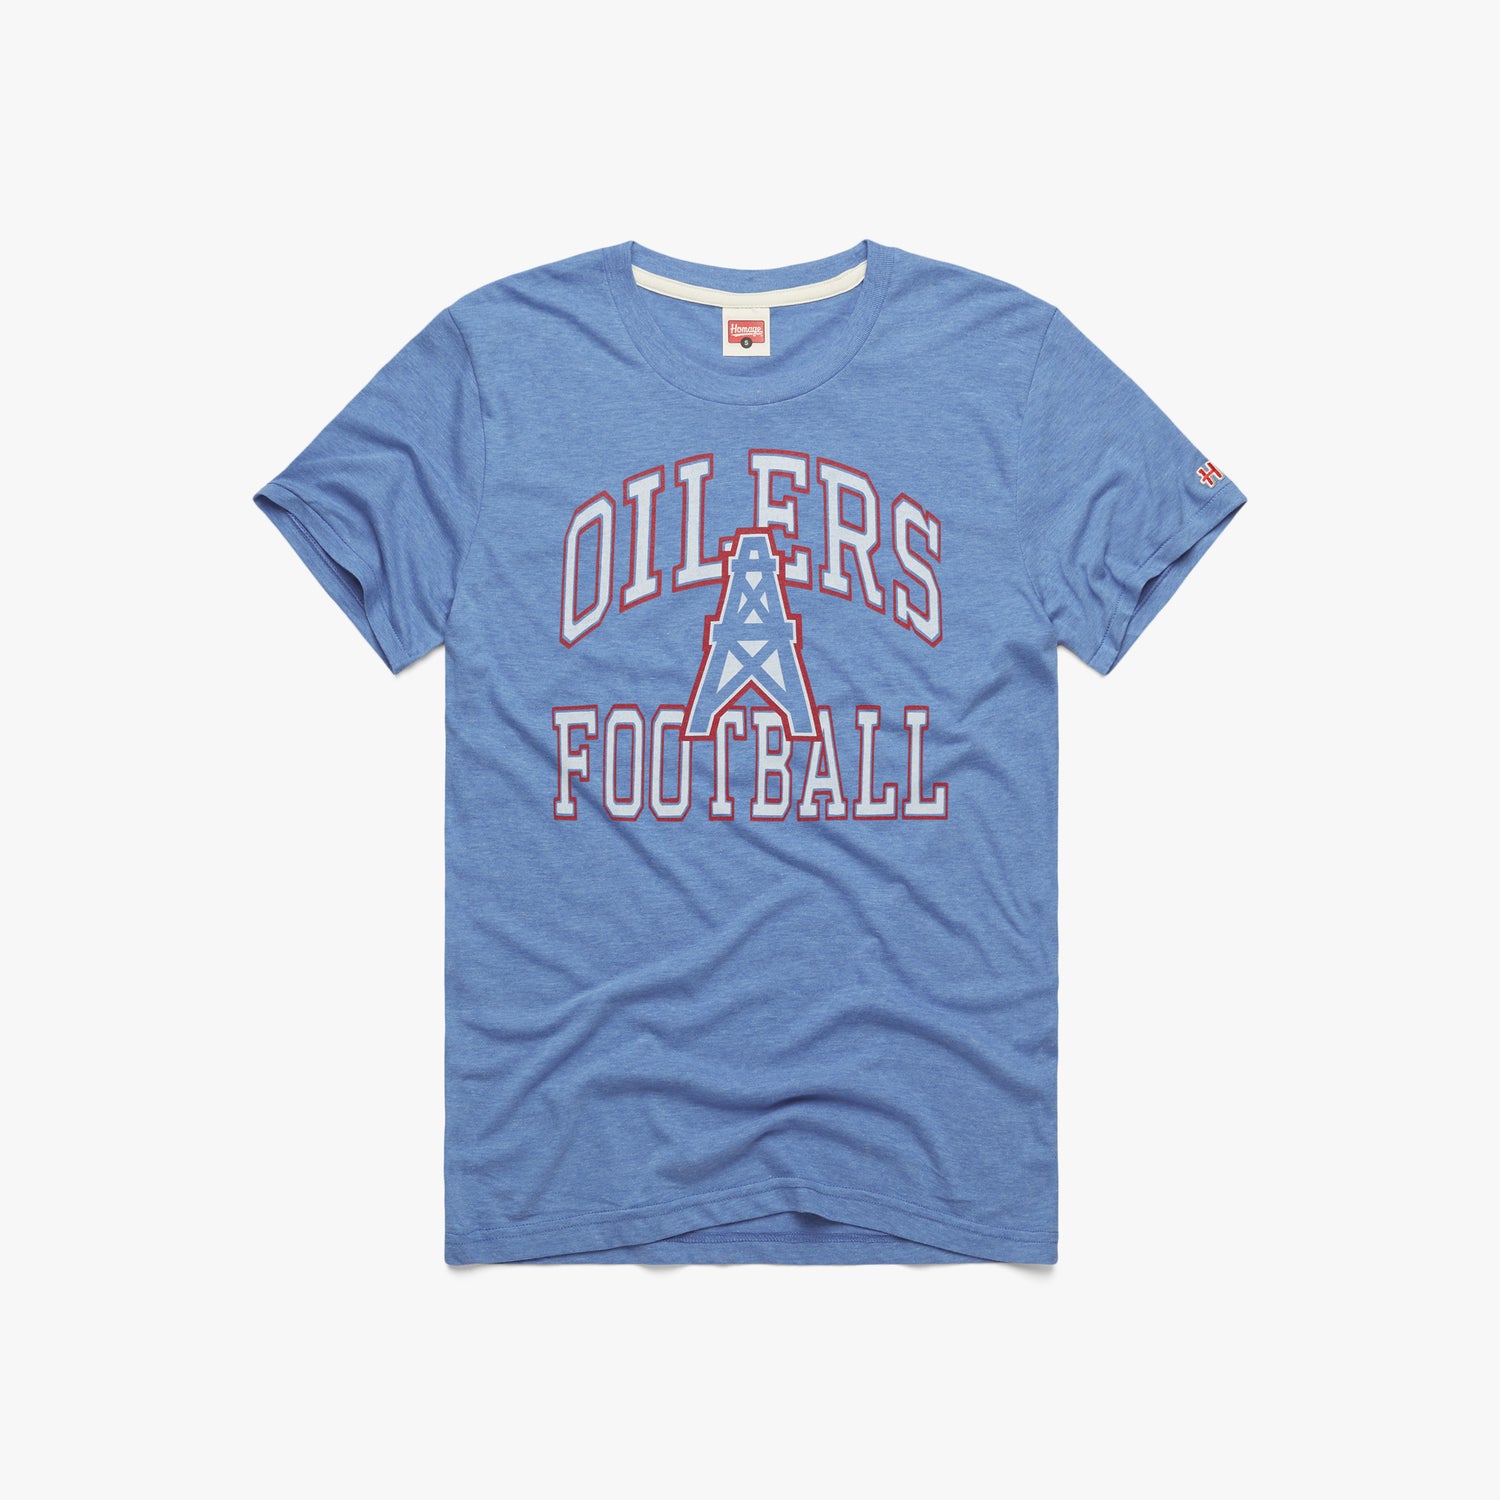 Suit Up In Official Number Tees - NFL Shop